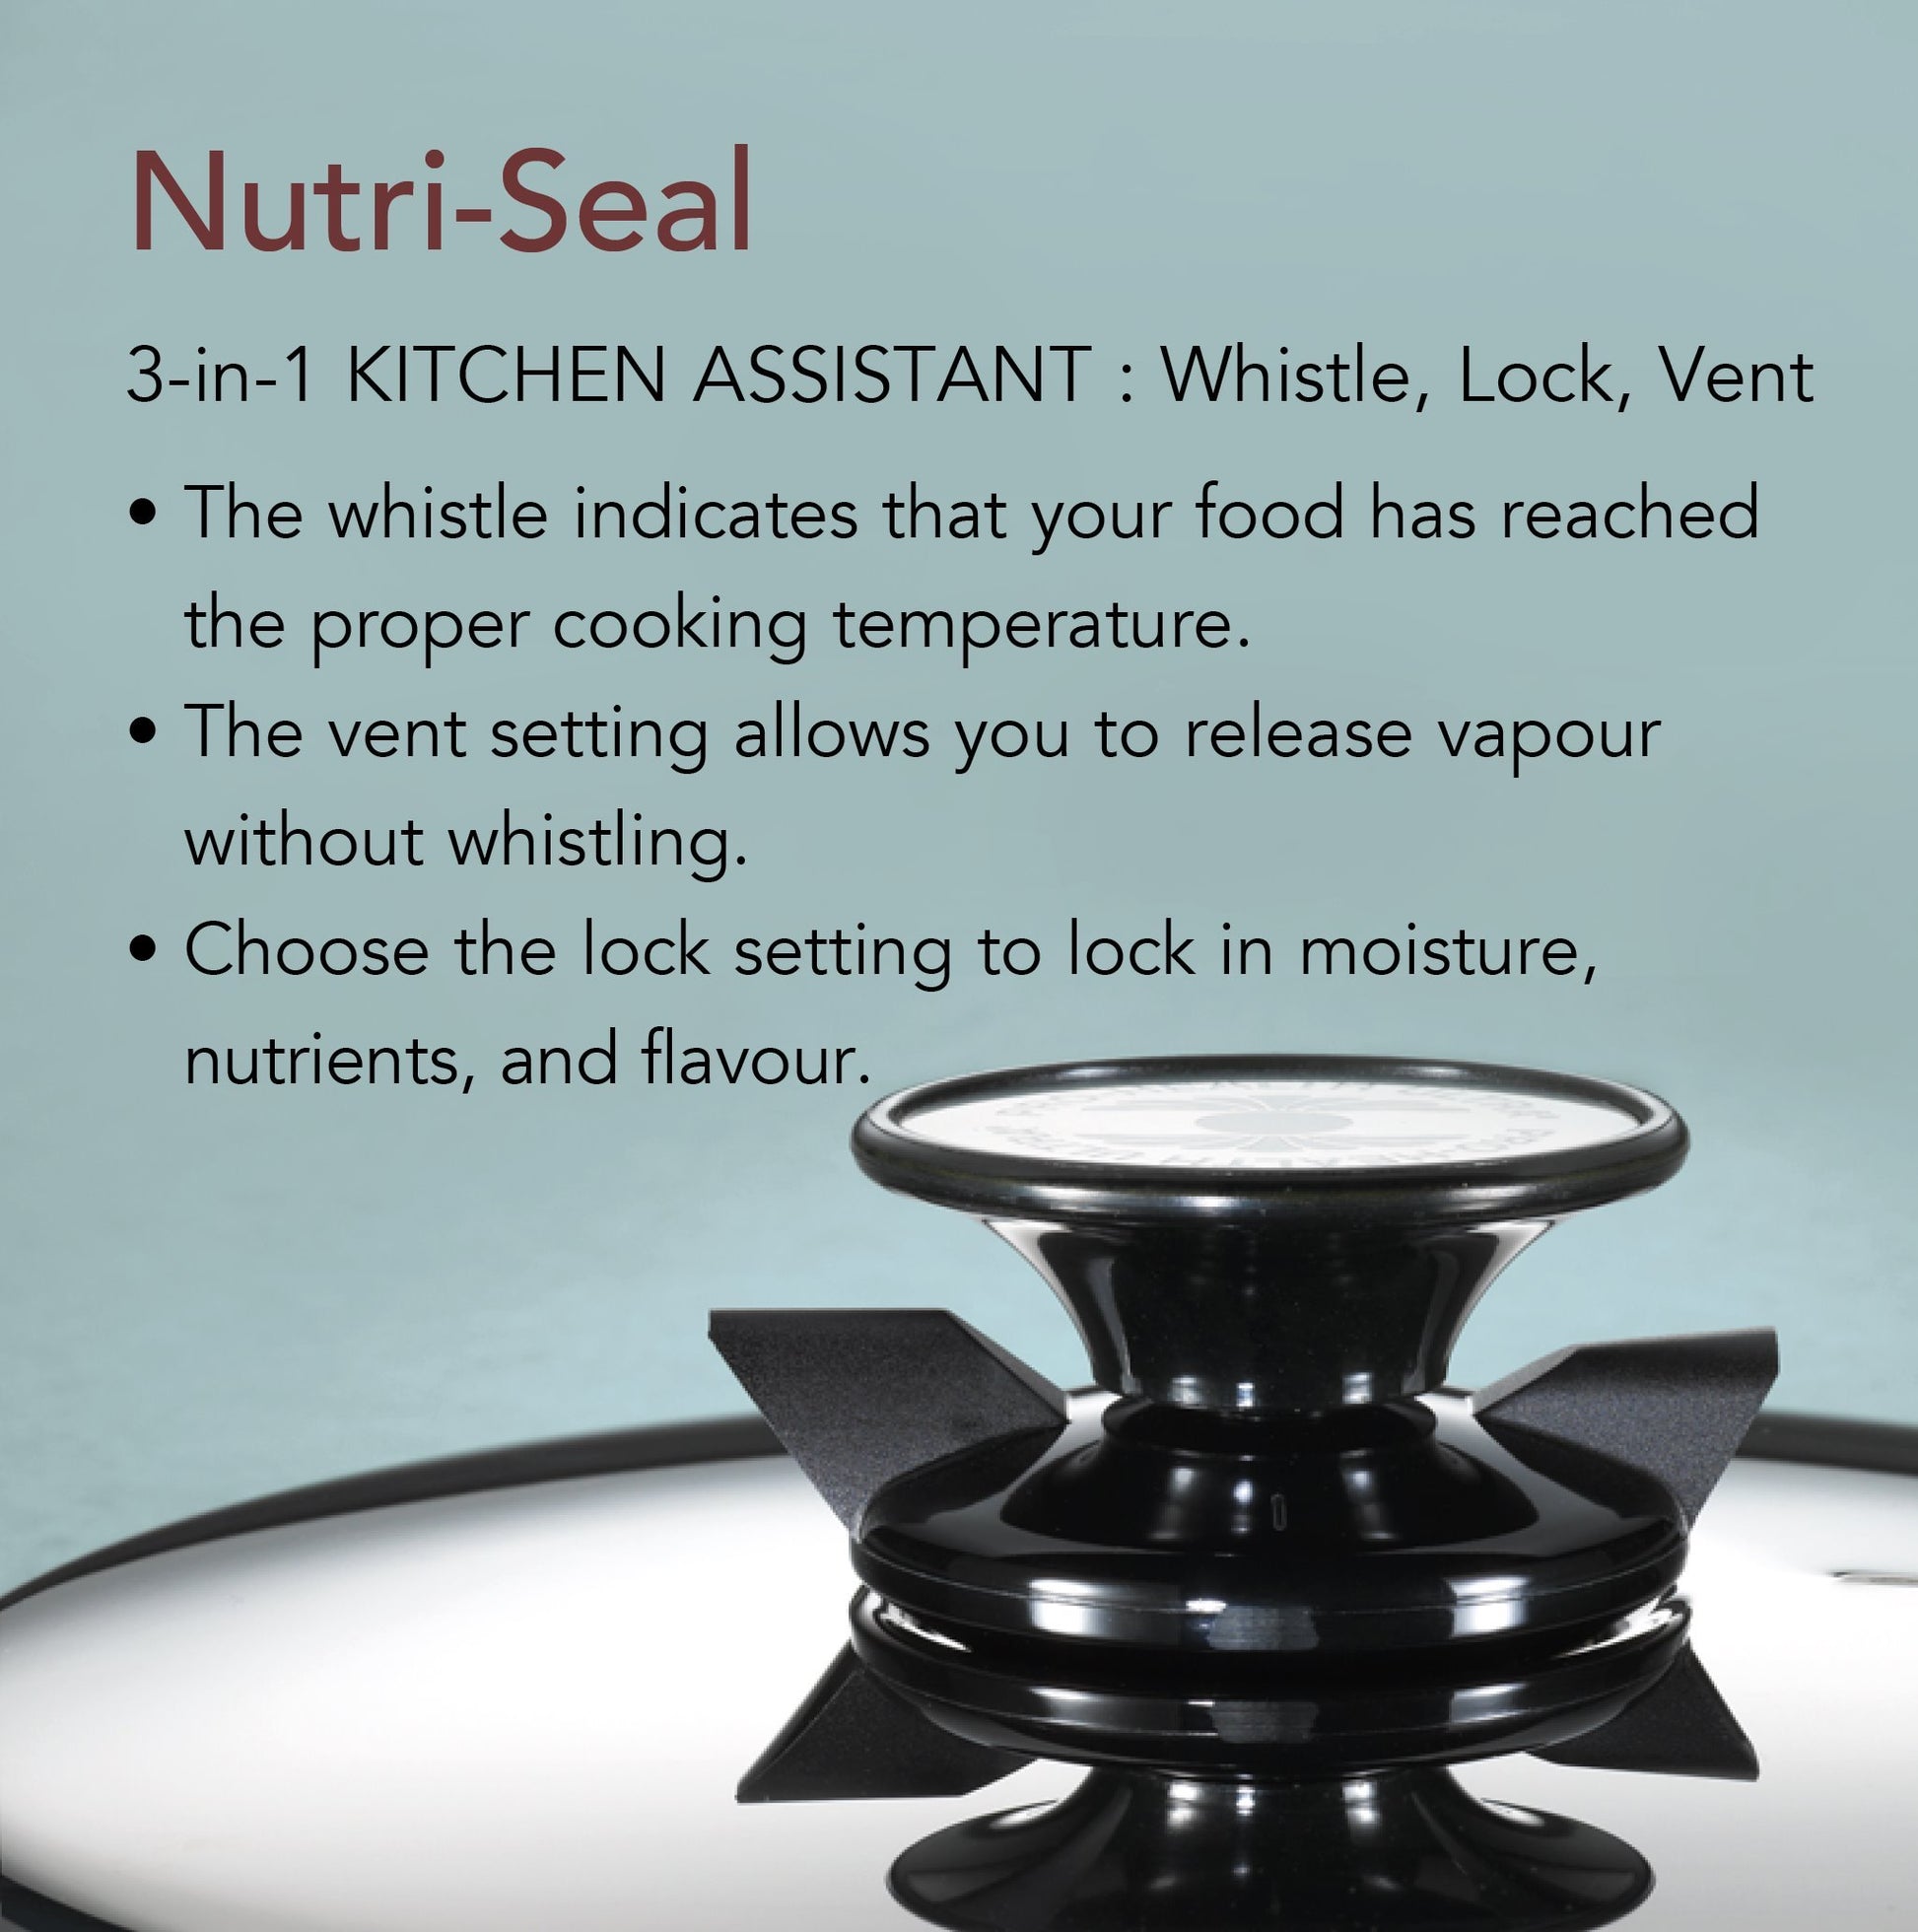 Nutricraft Basic Set, Titanium Stainless Steel (316Ti), Made in the U.S.A. Set Nutricraft Cookware 